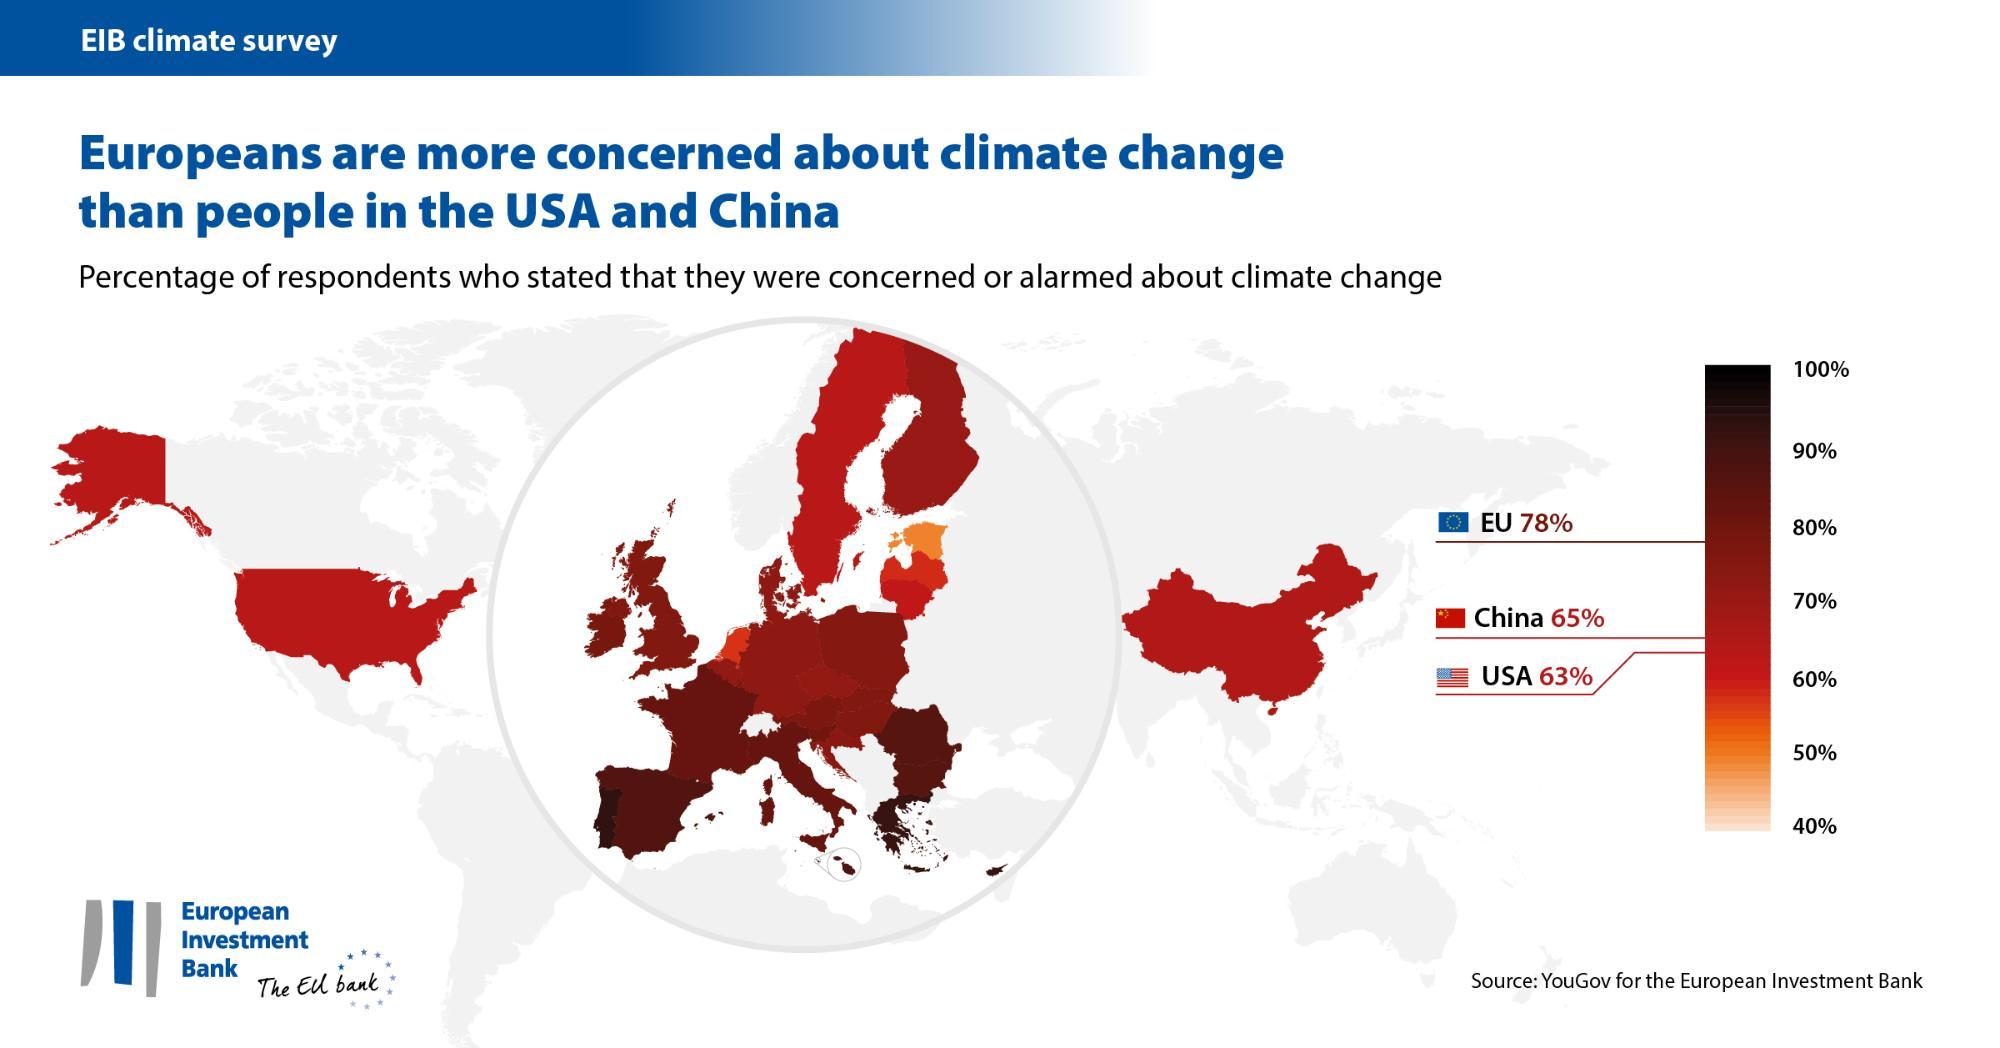 Europeans are more concerned about climate change than people in the USA and China